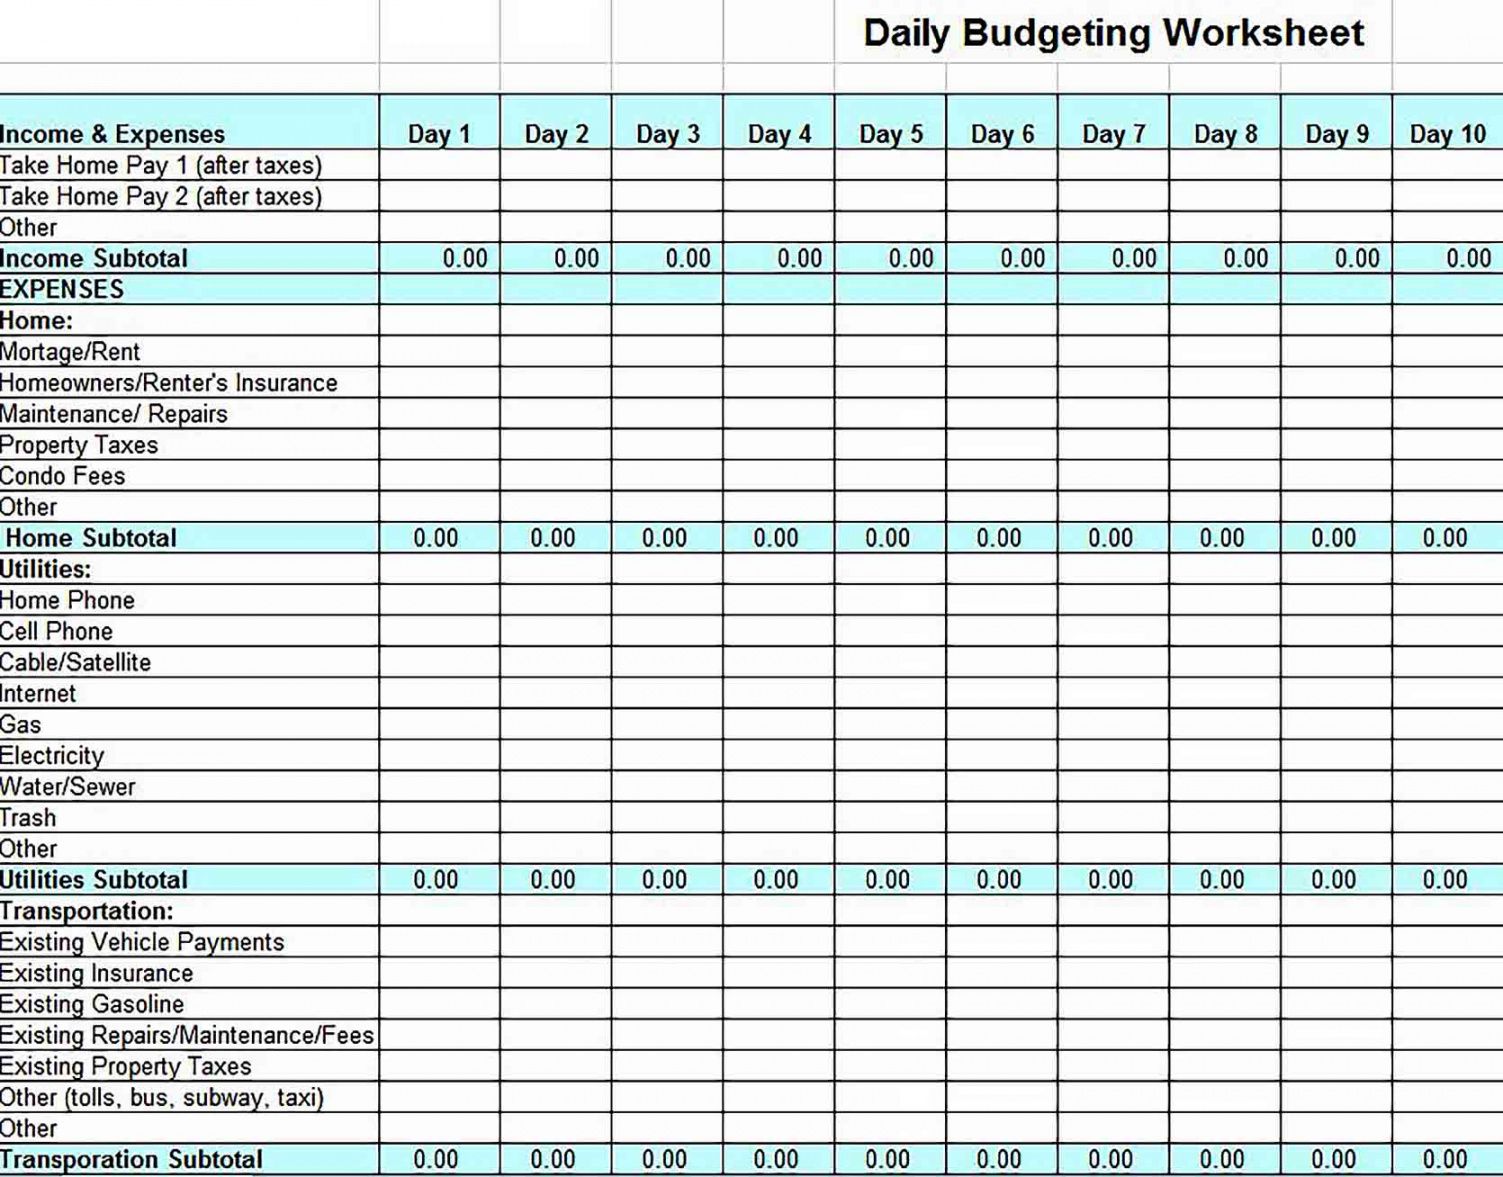 free excel business budget template  culturopedia spreadsheet template for budget example